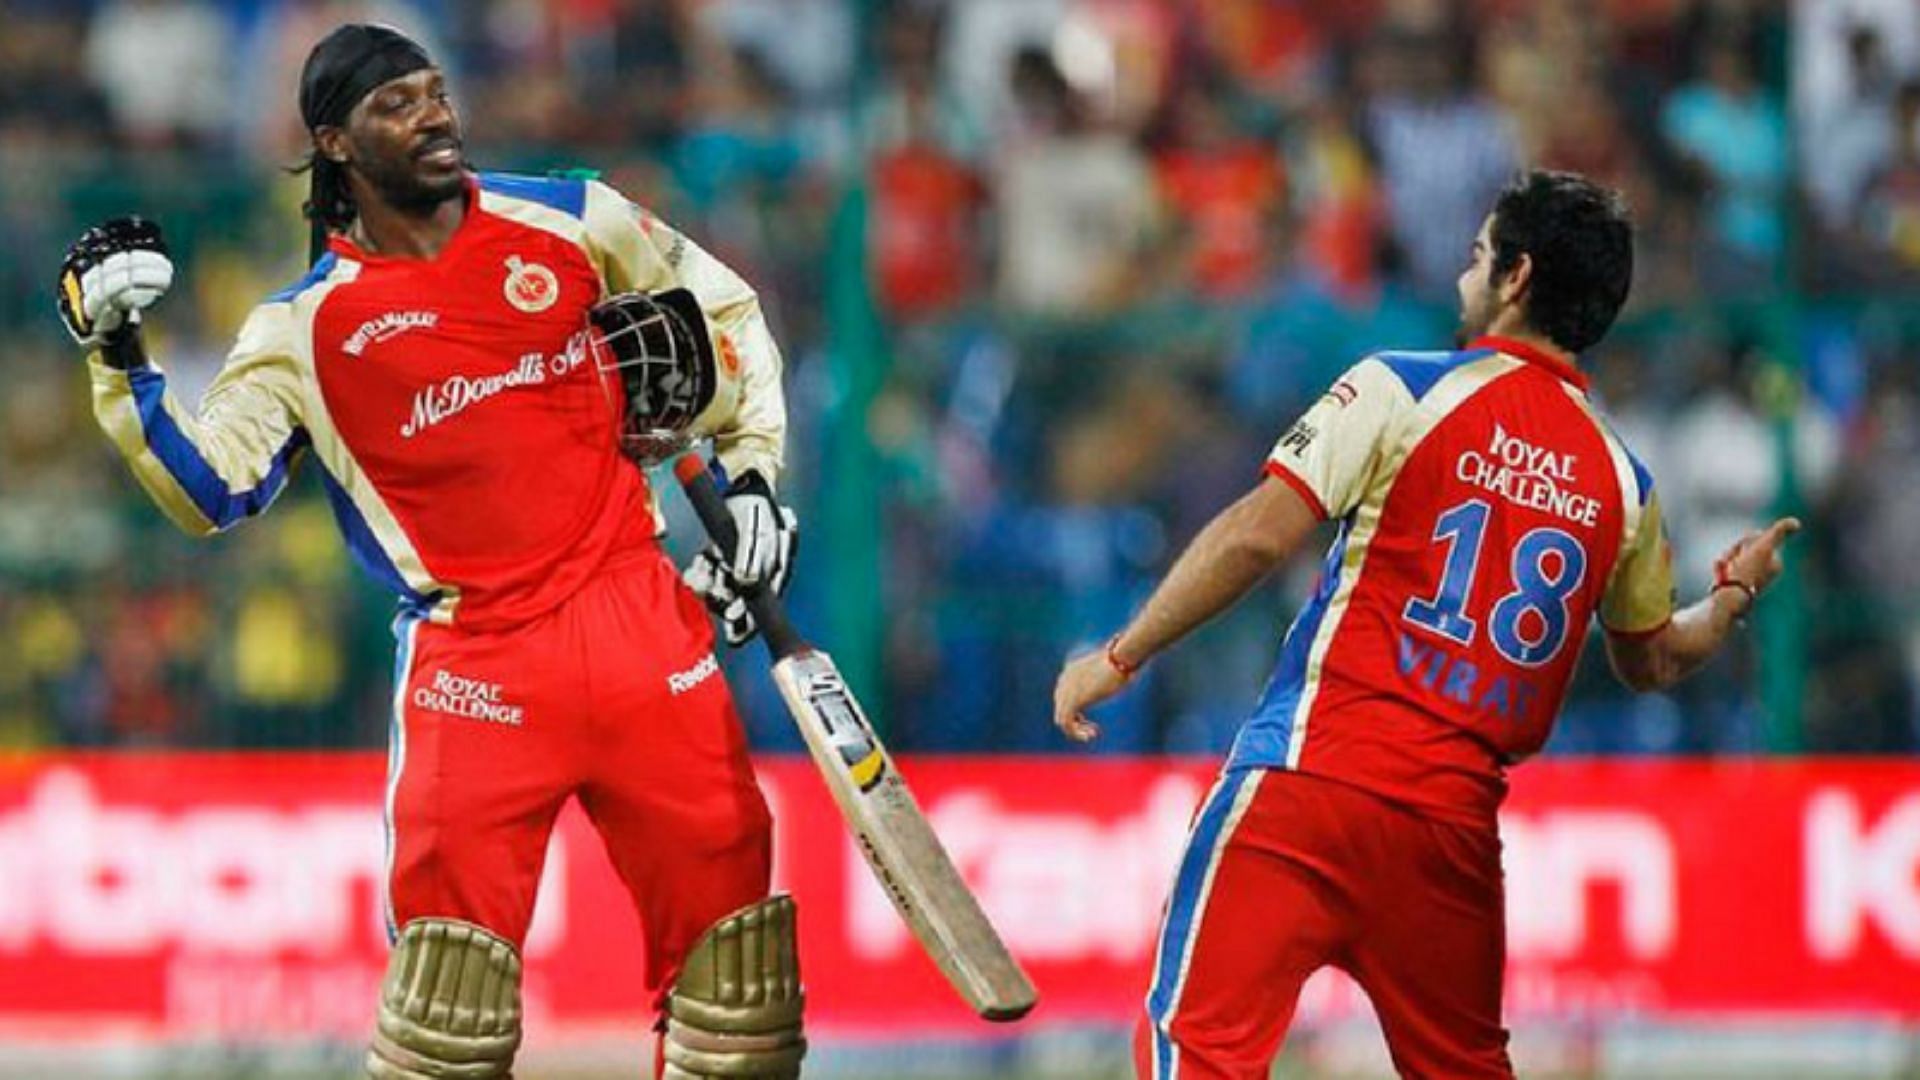 Chris Gayle (L) and Virat Kohli also had a healthy rivalry for the Orange Cap (P.C.:Twitter)